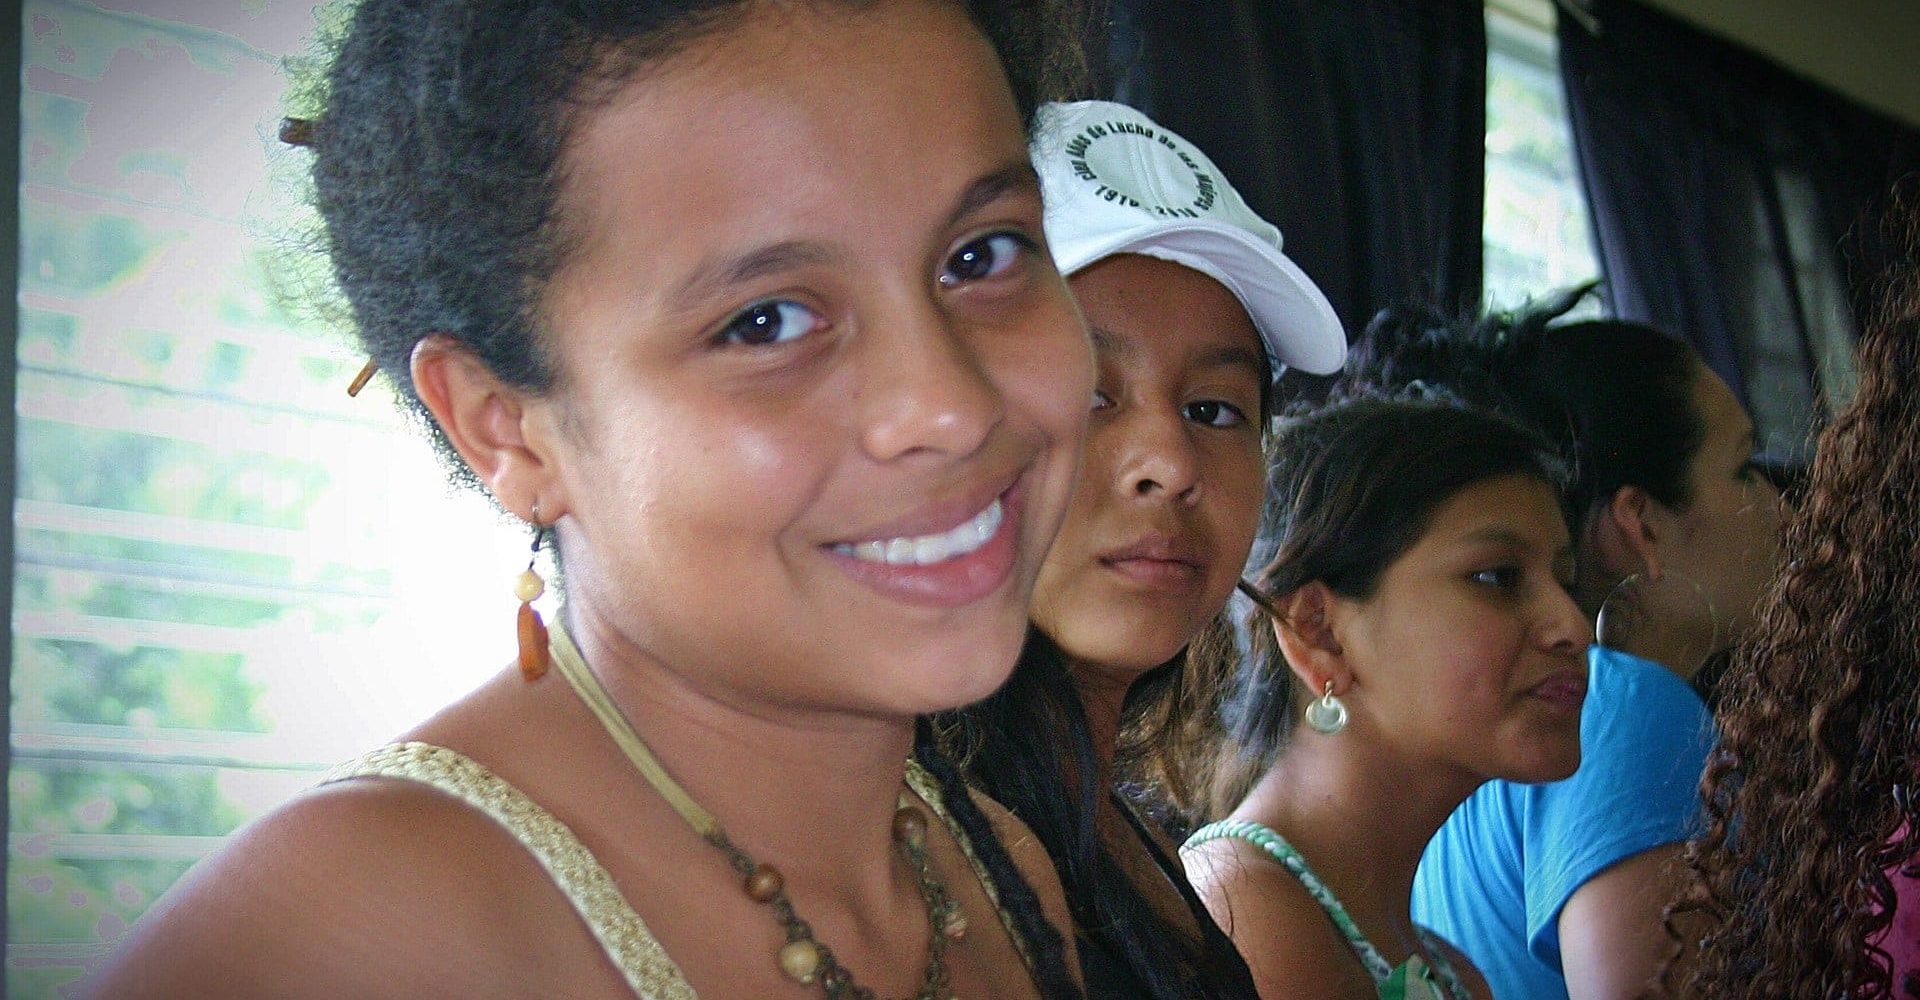 Picture of a young woman with short hair from El Salvador looking into the camera from the side.